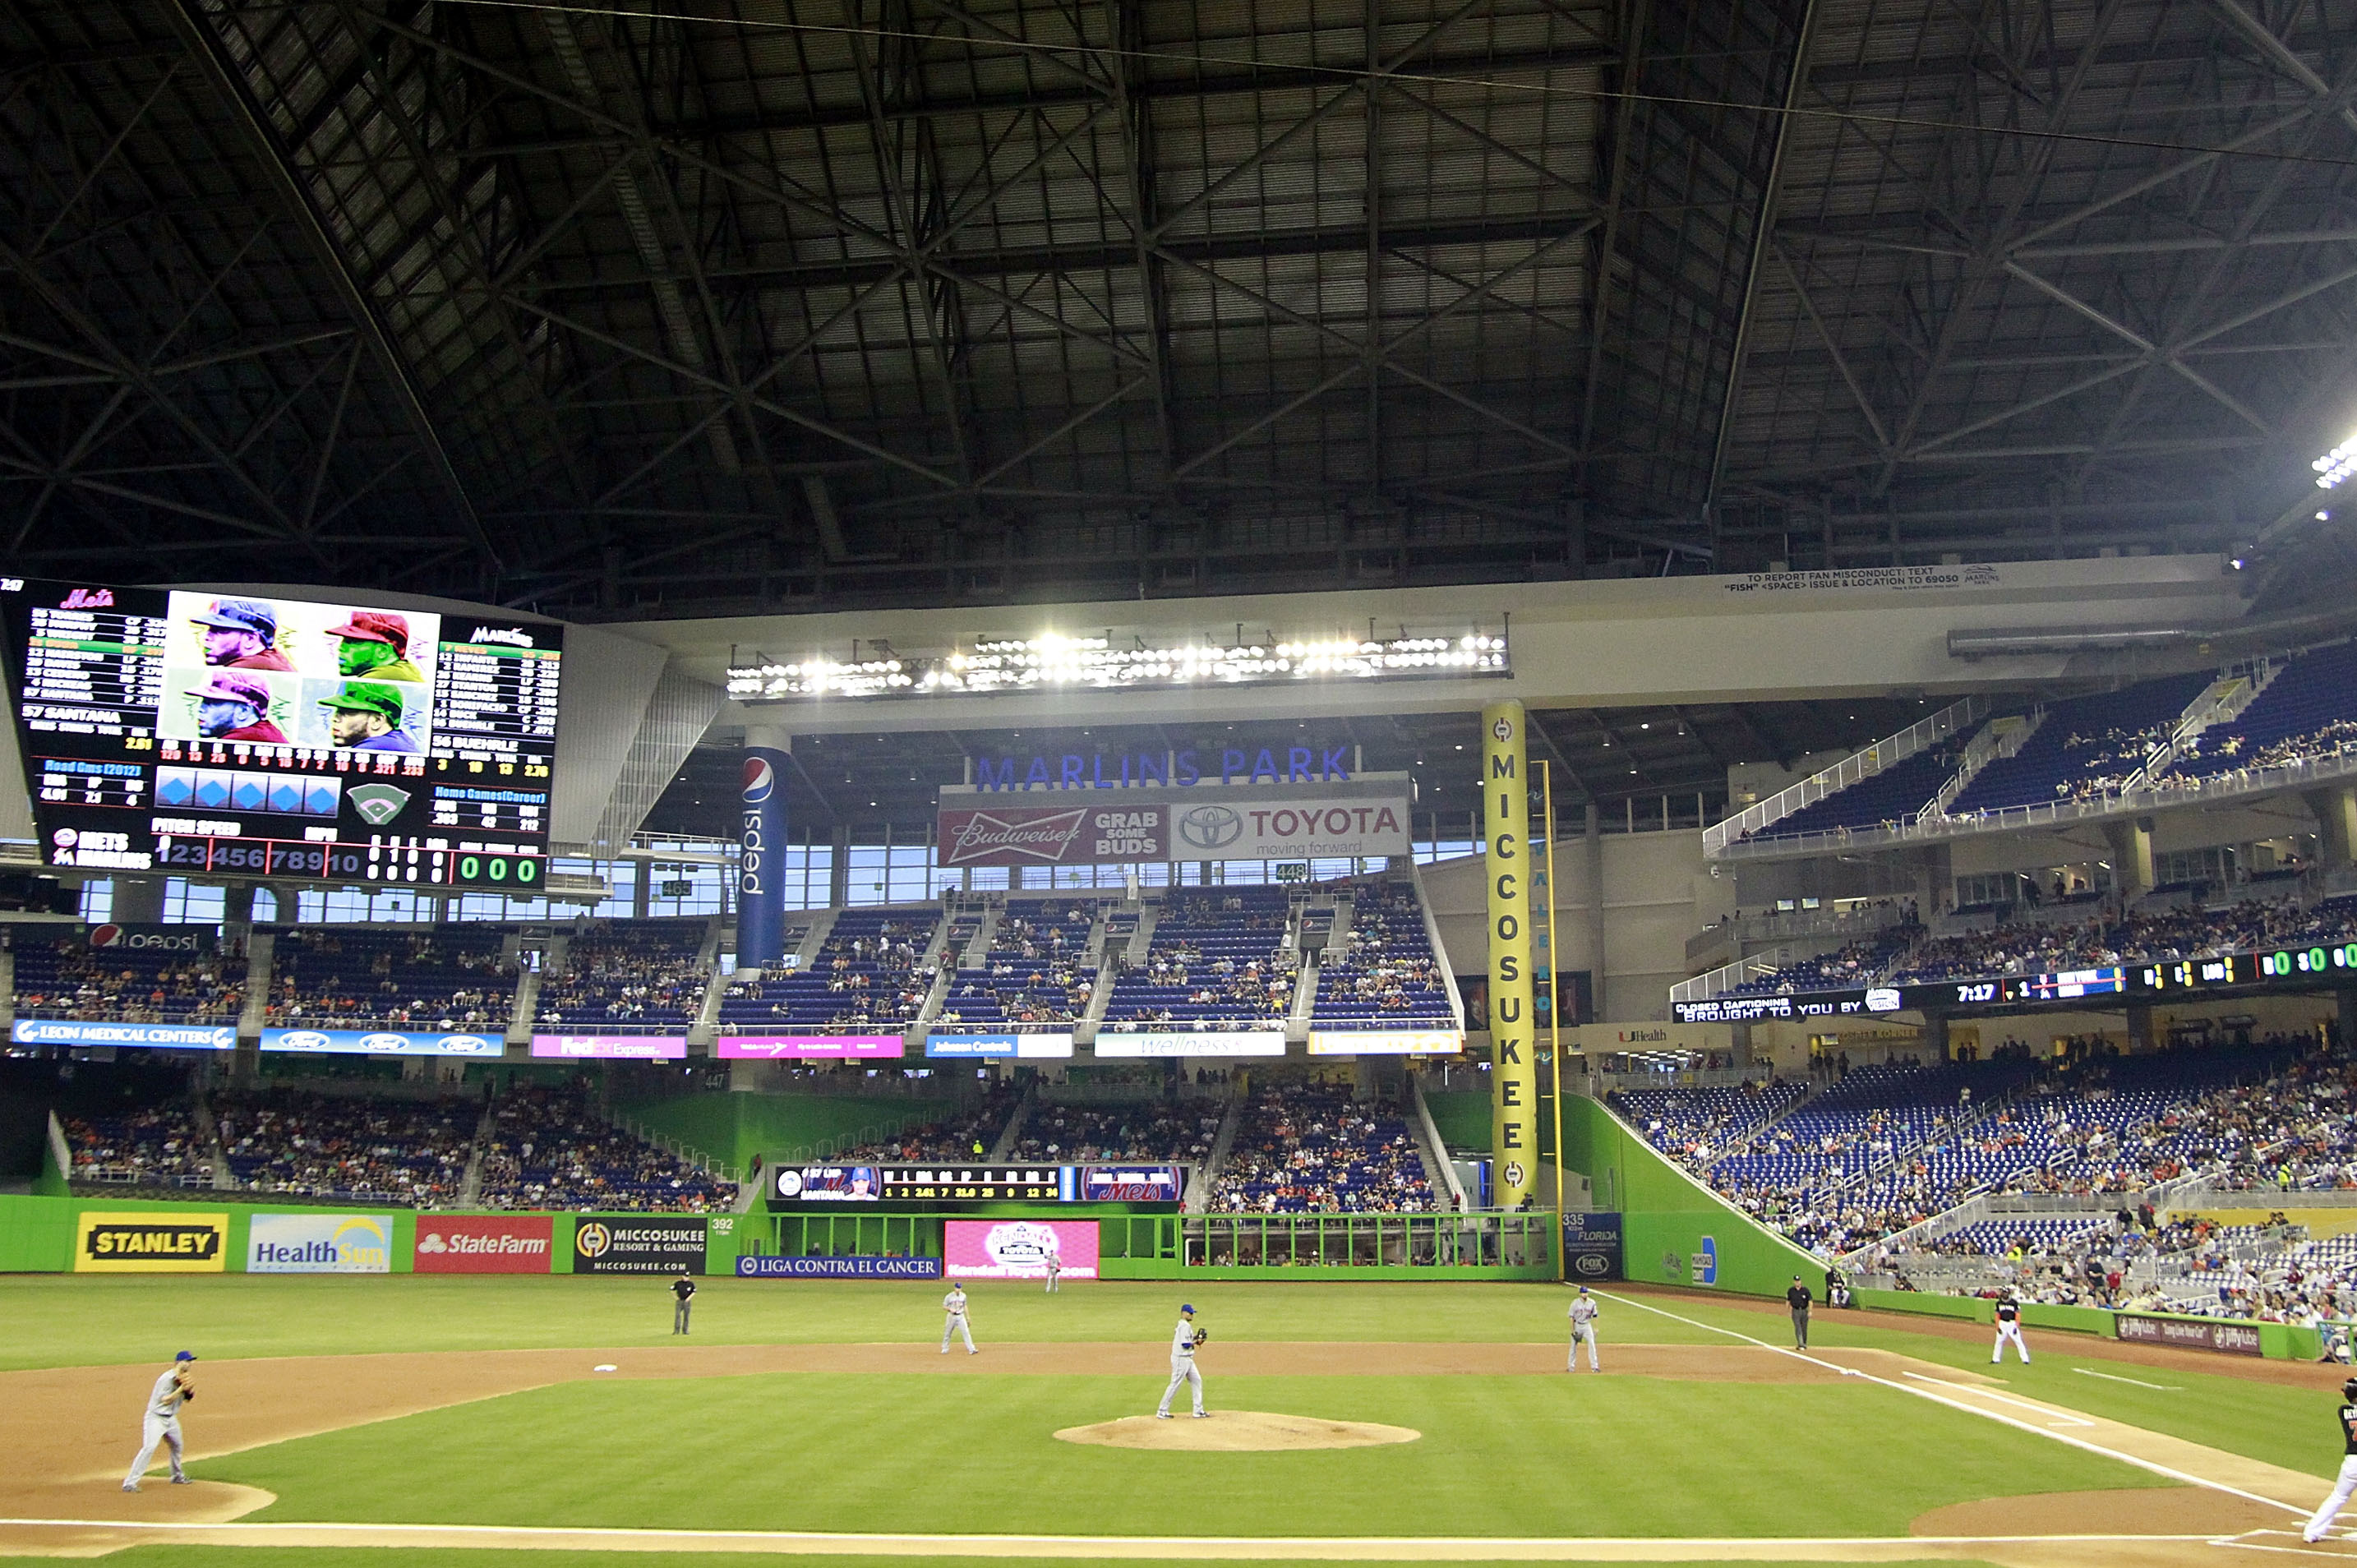 Reports: Marlins To Rename Stadium LoanDepot Park After Naming Rights Deal  